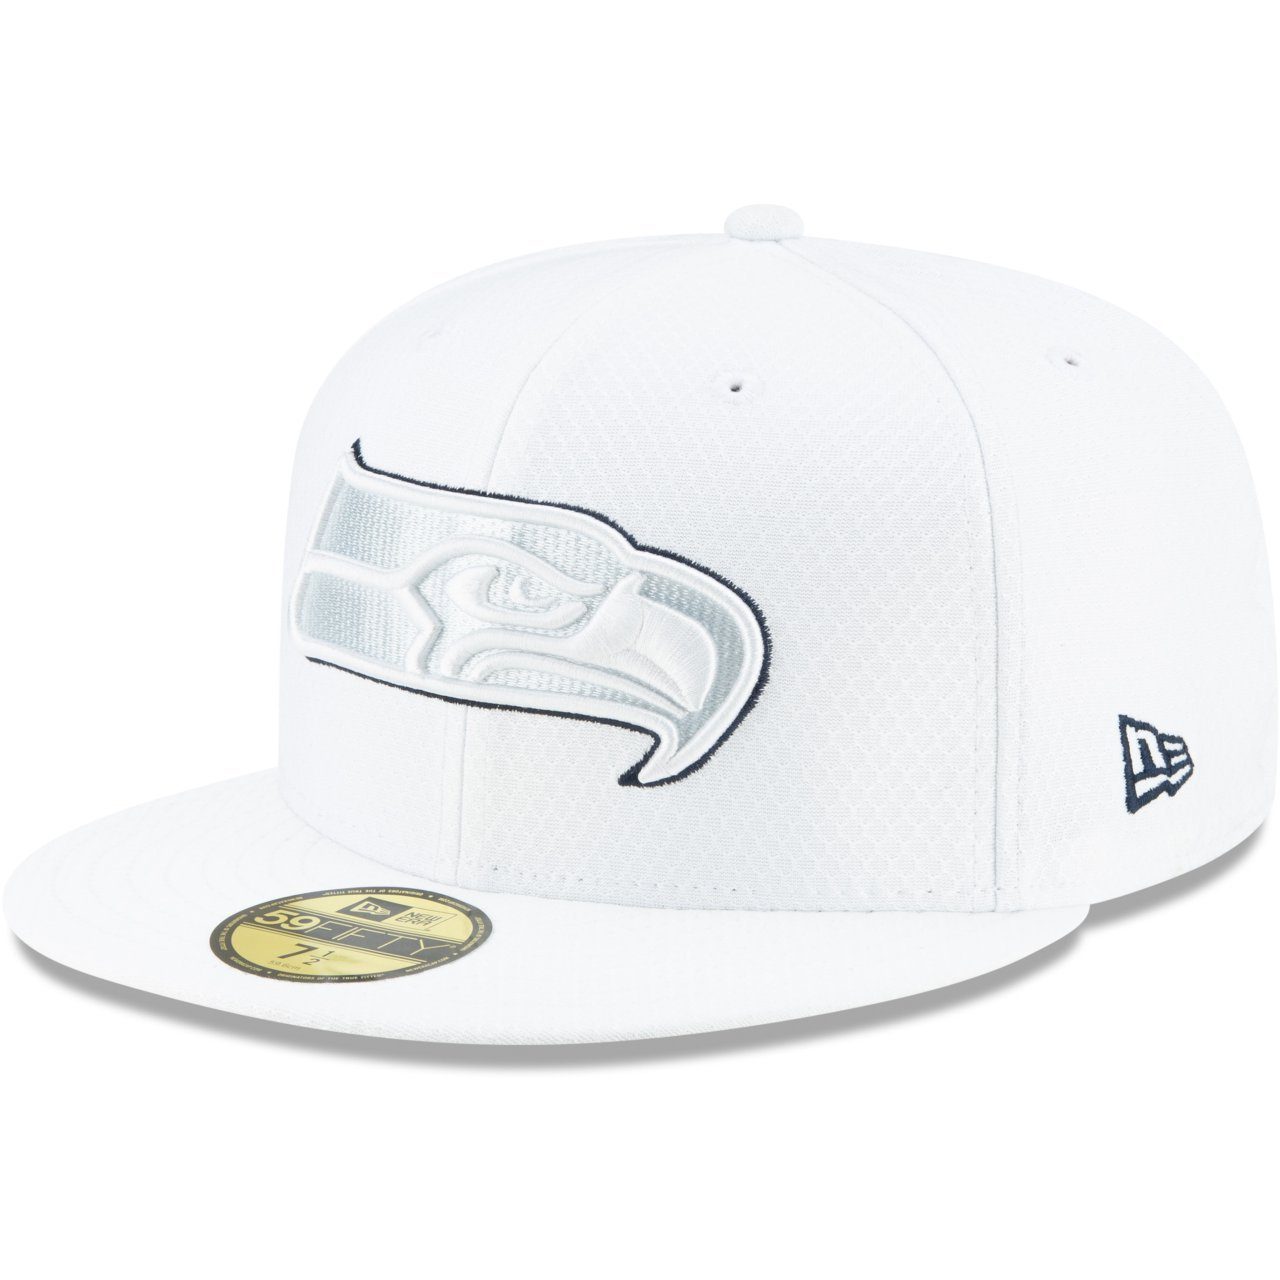 New Era Fitted Cap 59Fifty PLATINUM NFL Sideline Seattle Seahawks